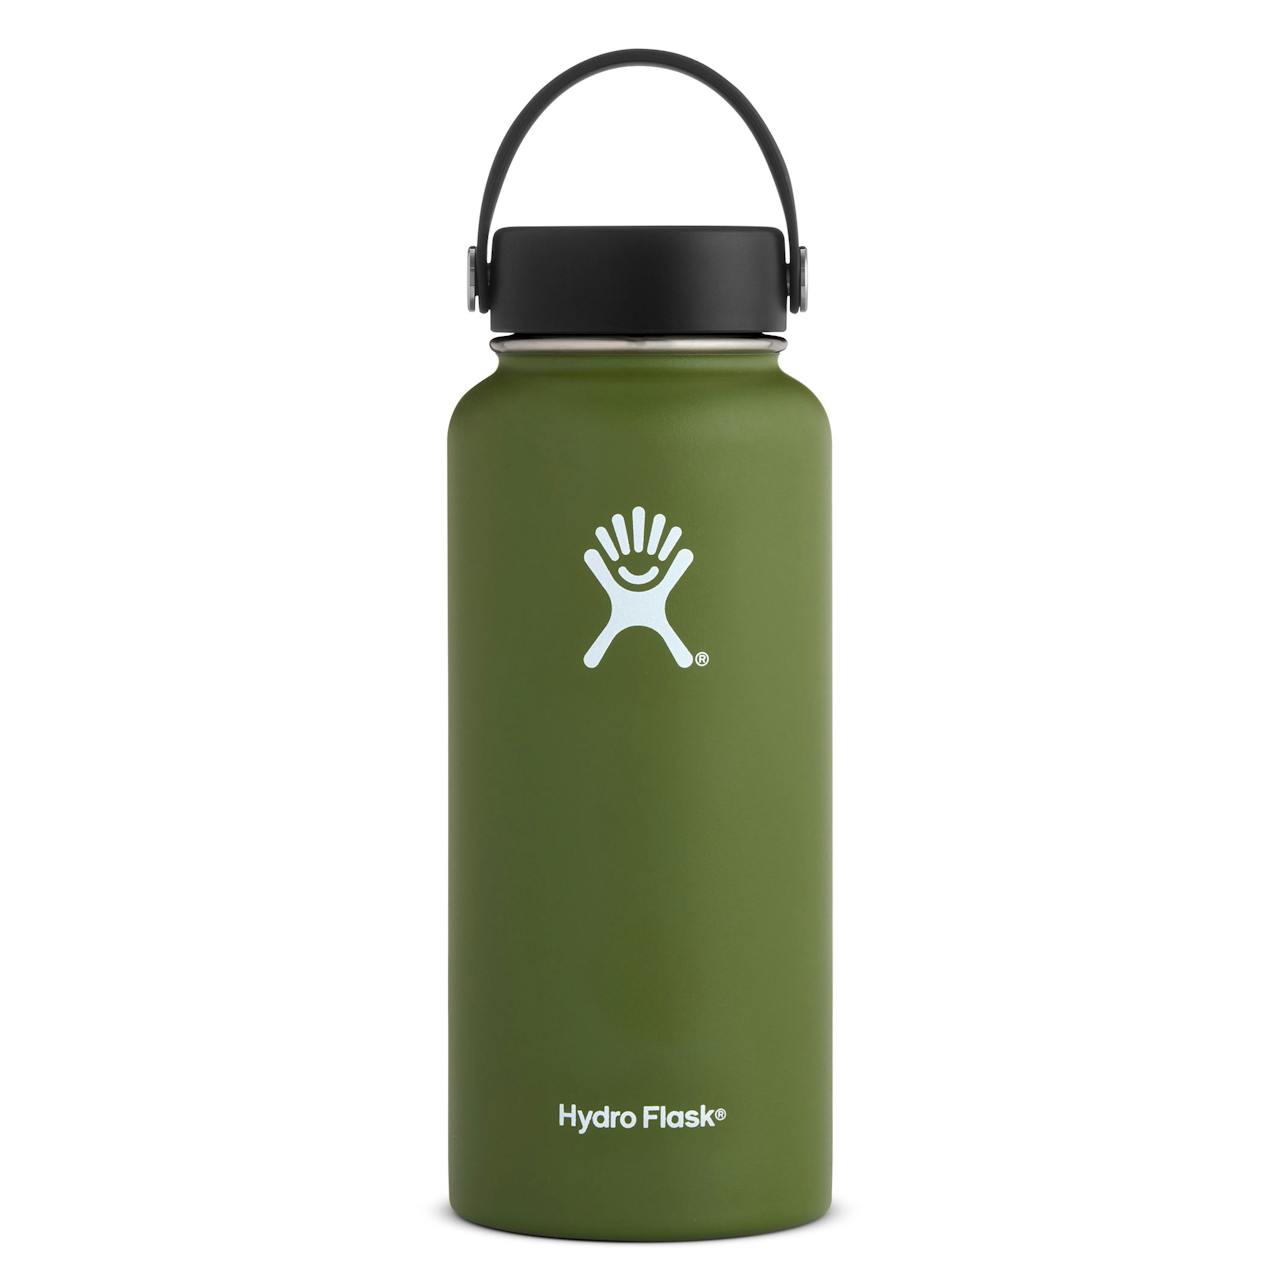 Hydro Flask 32 oz. Insulated Water Bottle